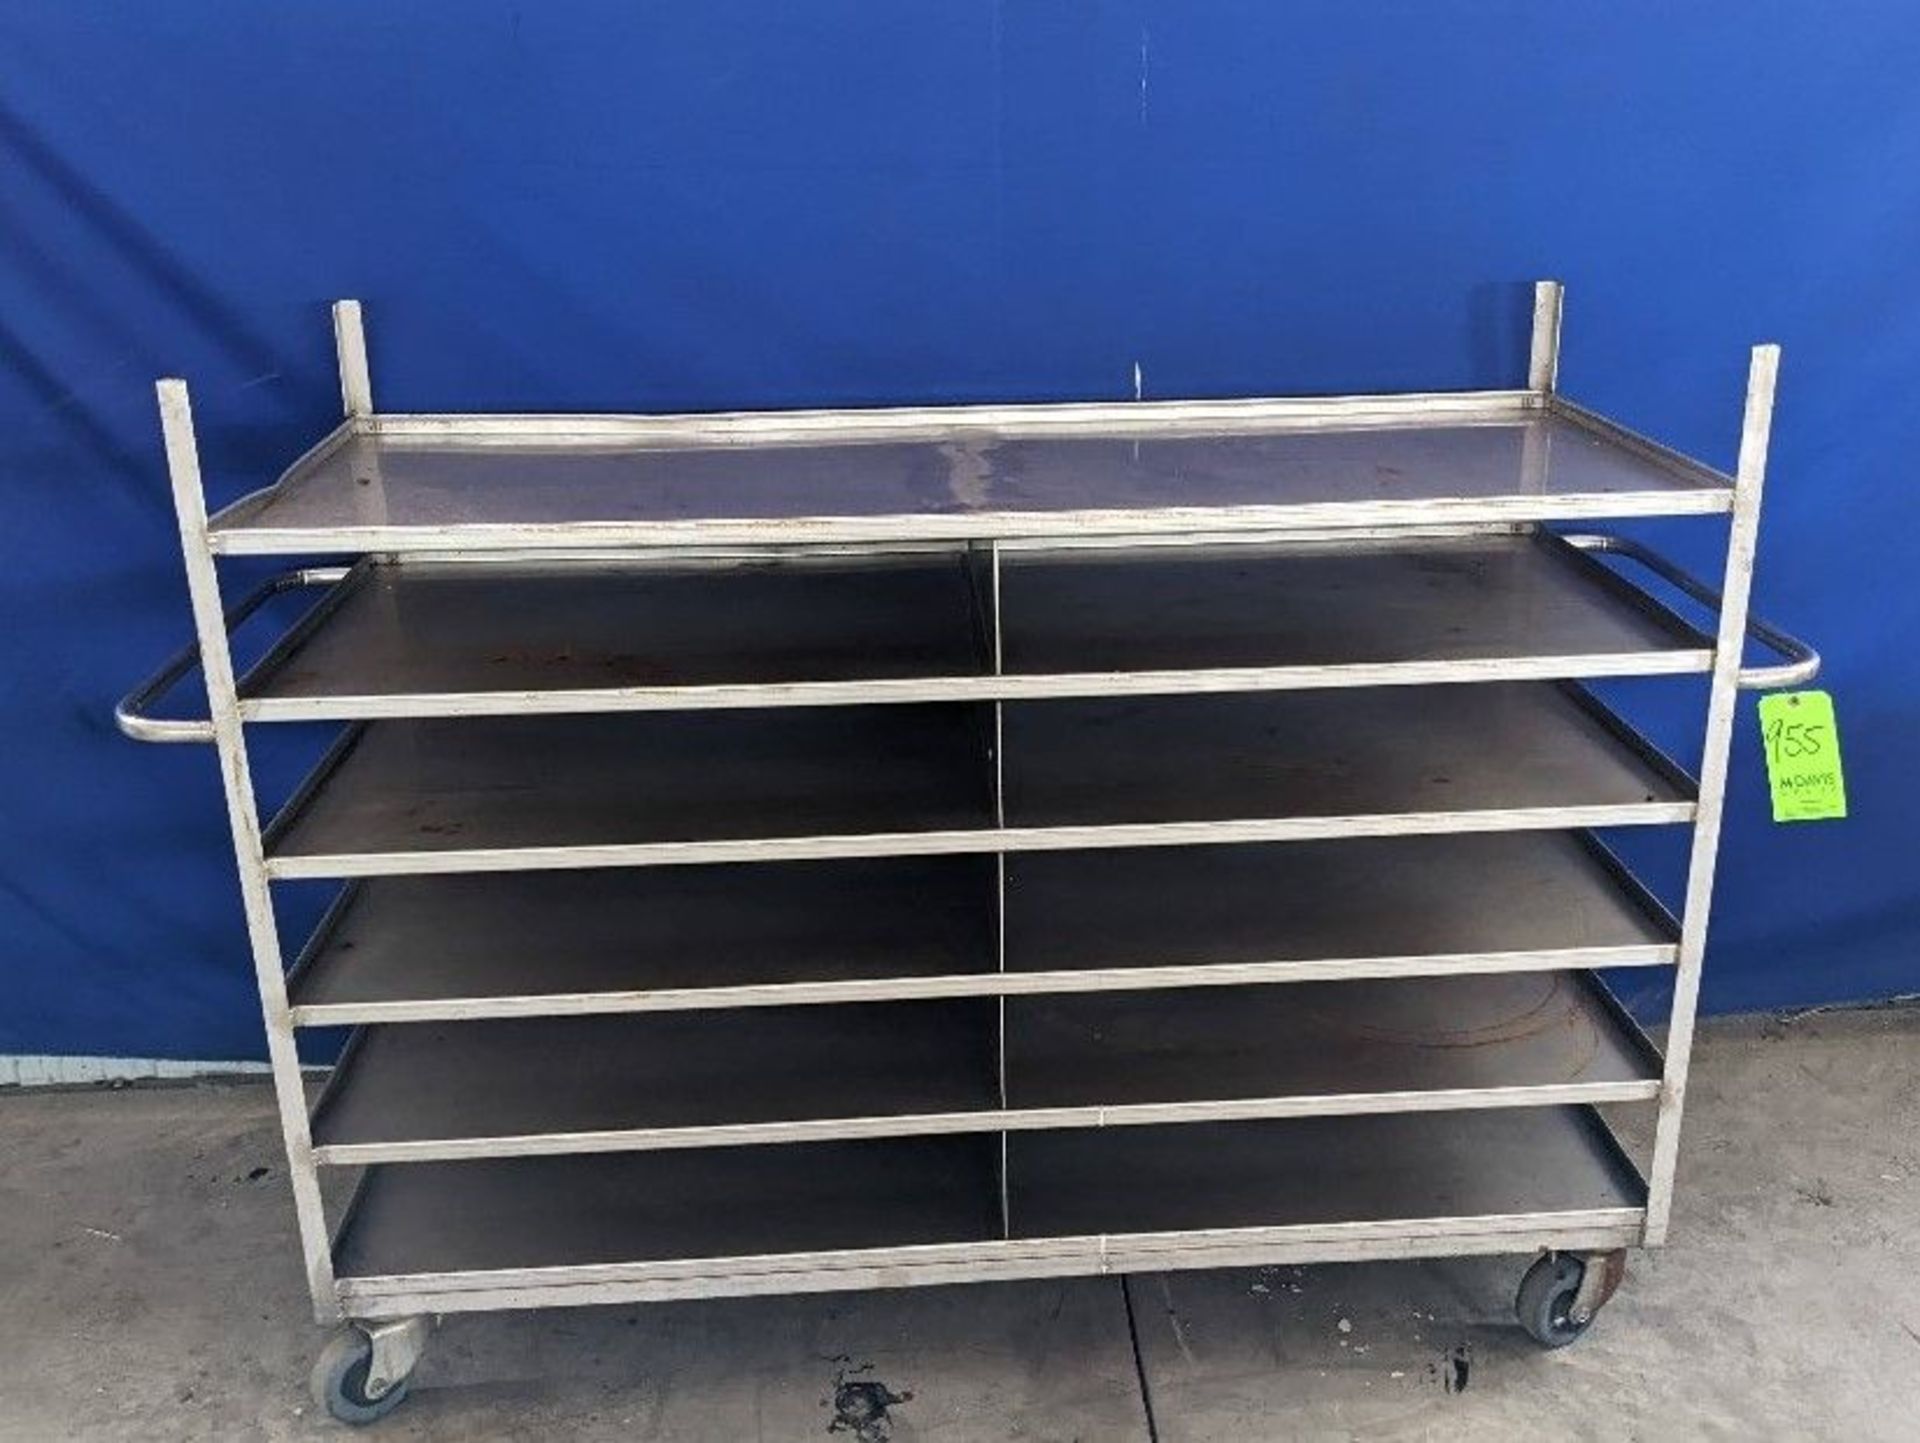 Qty (1) Material Handling Cart - Dimensions: 69"L x 28"W x 53"H (Handles Stick Out 6" on Each Side),